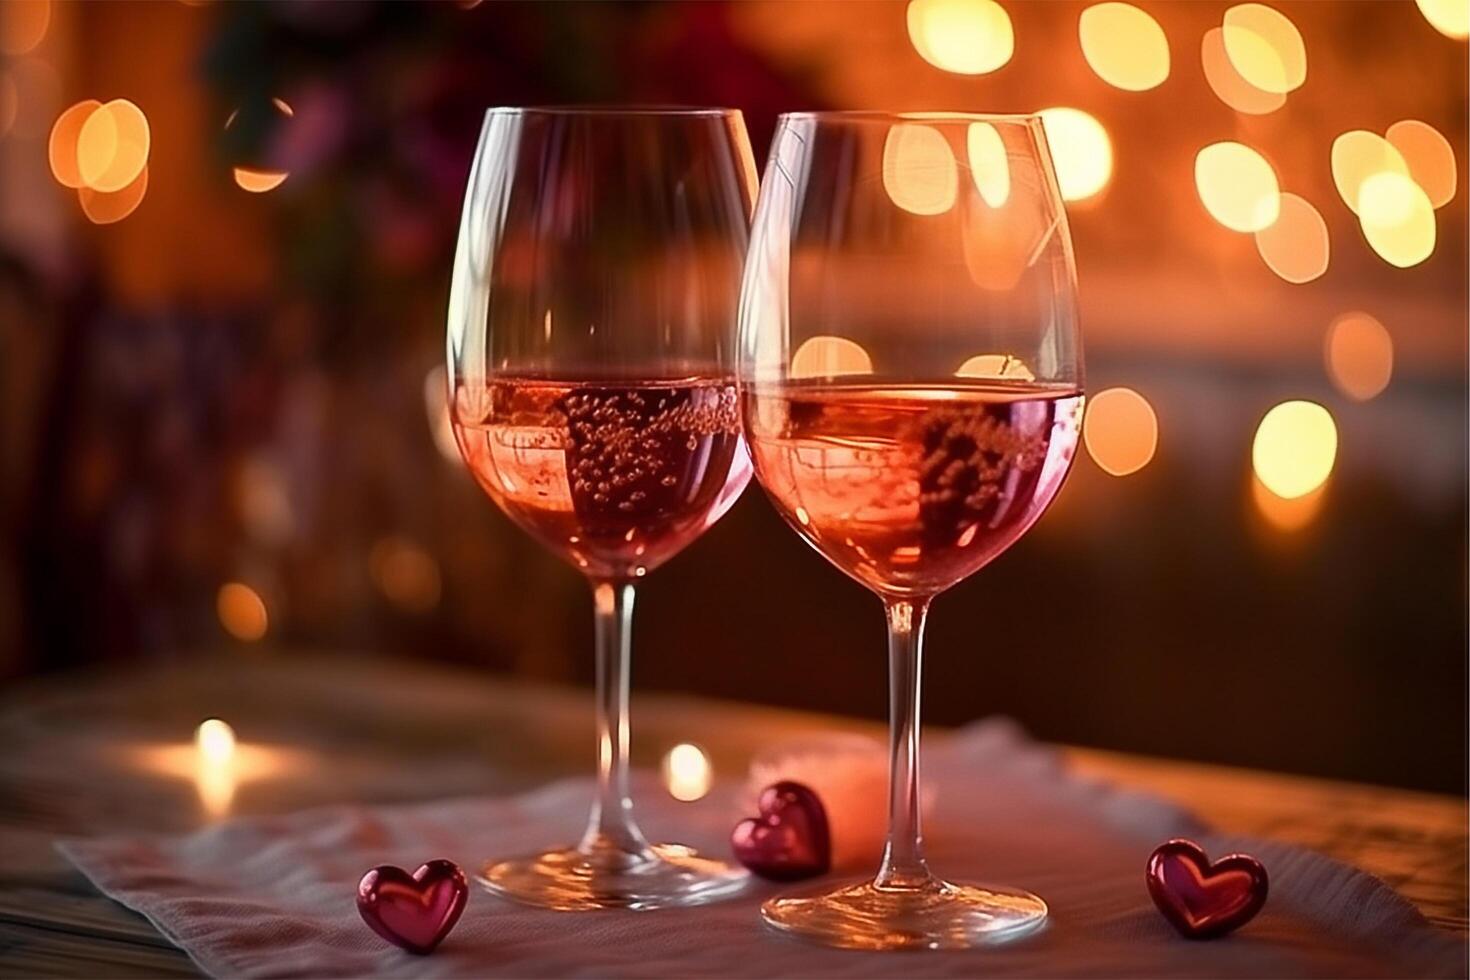 Background for valentine39s day with glasses of wine, photo